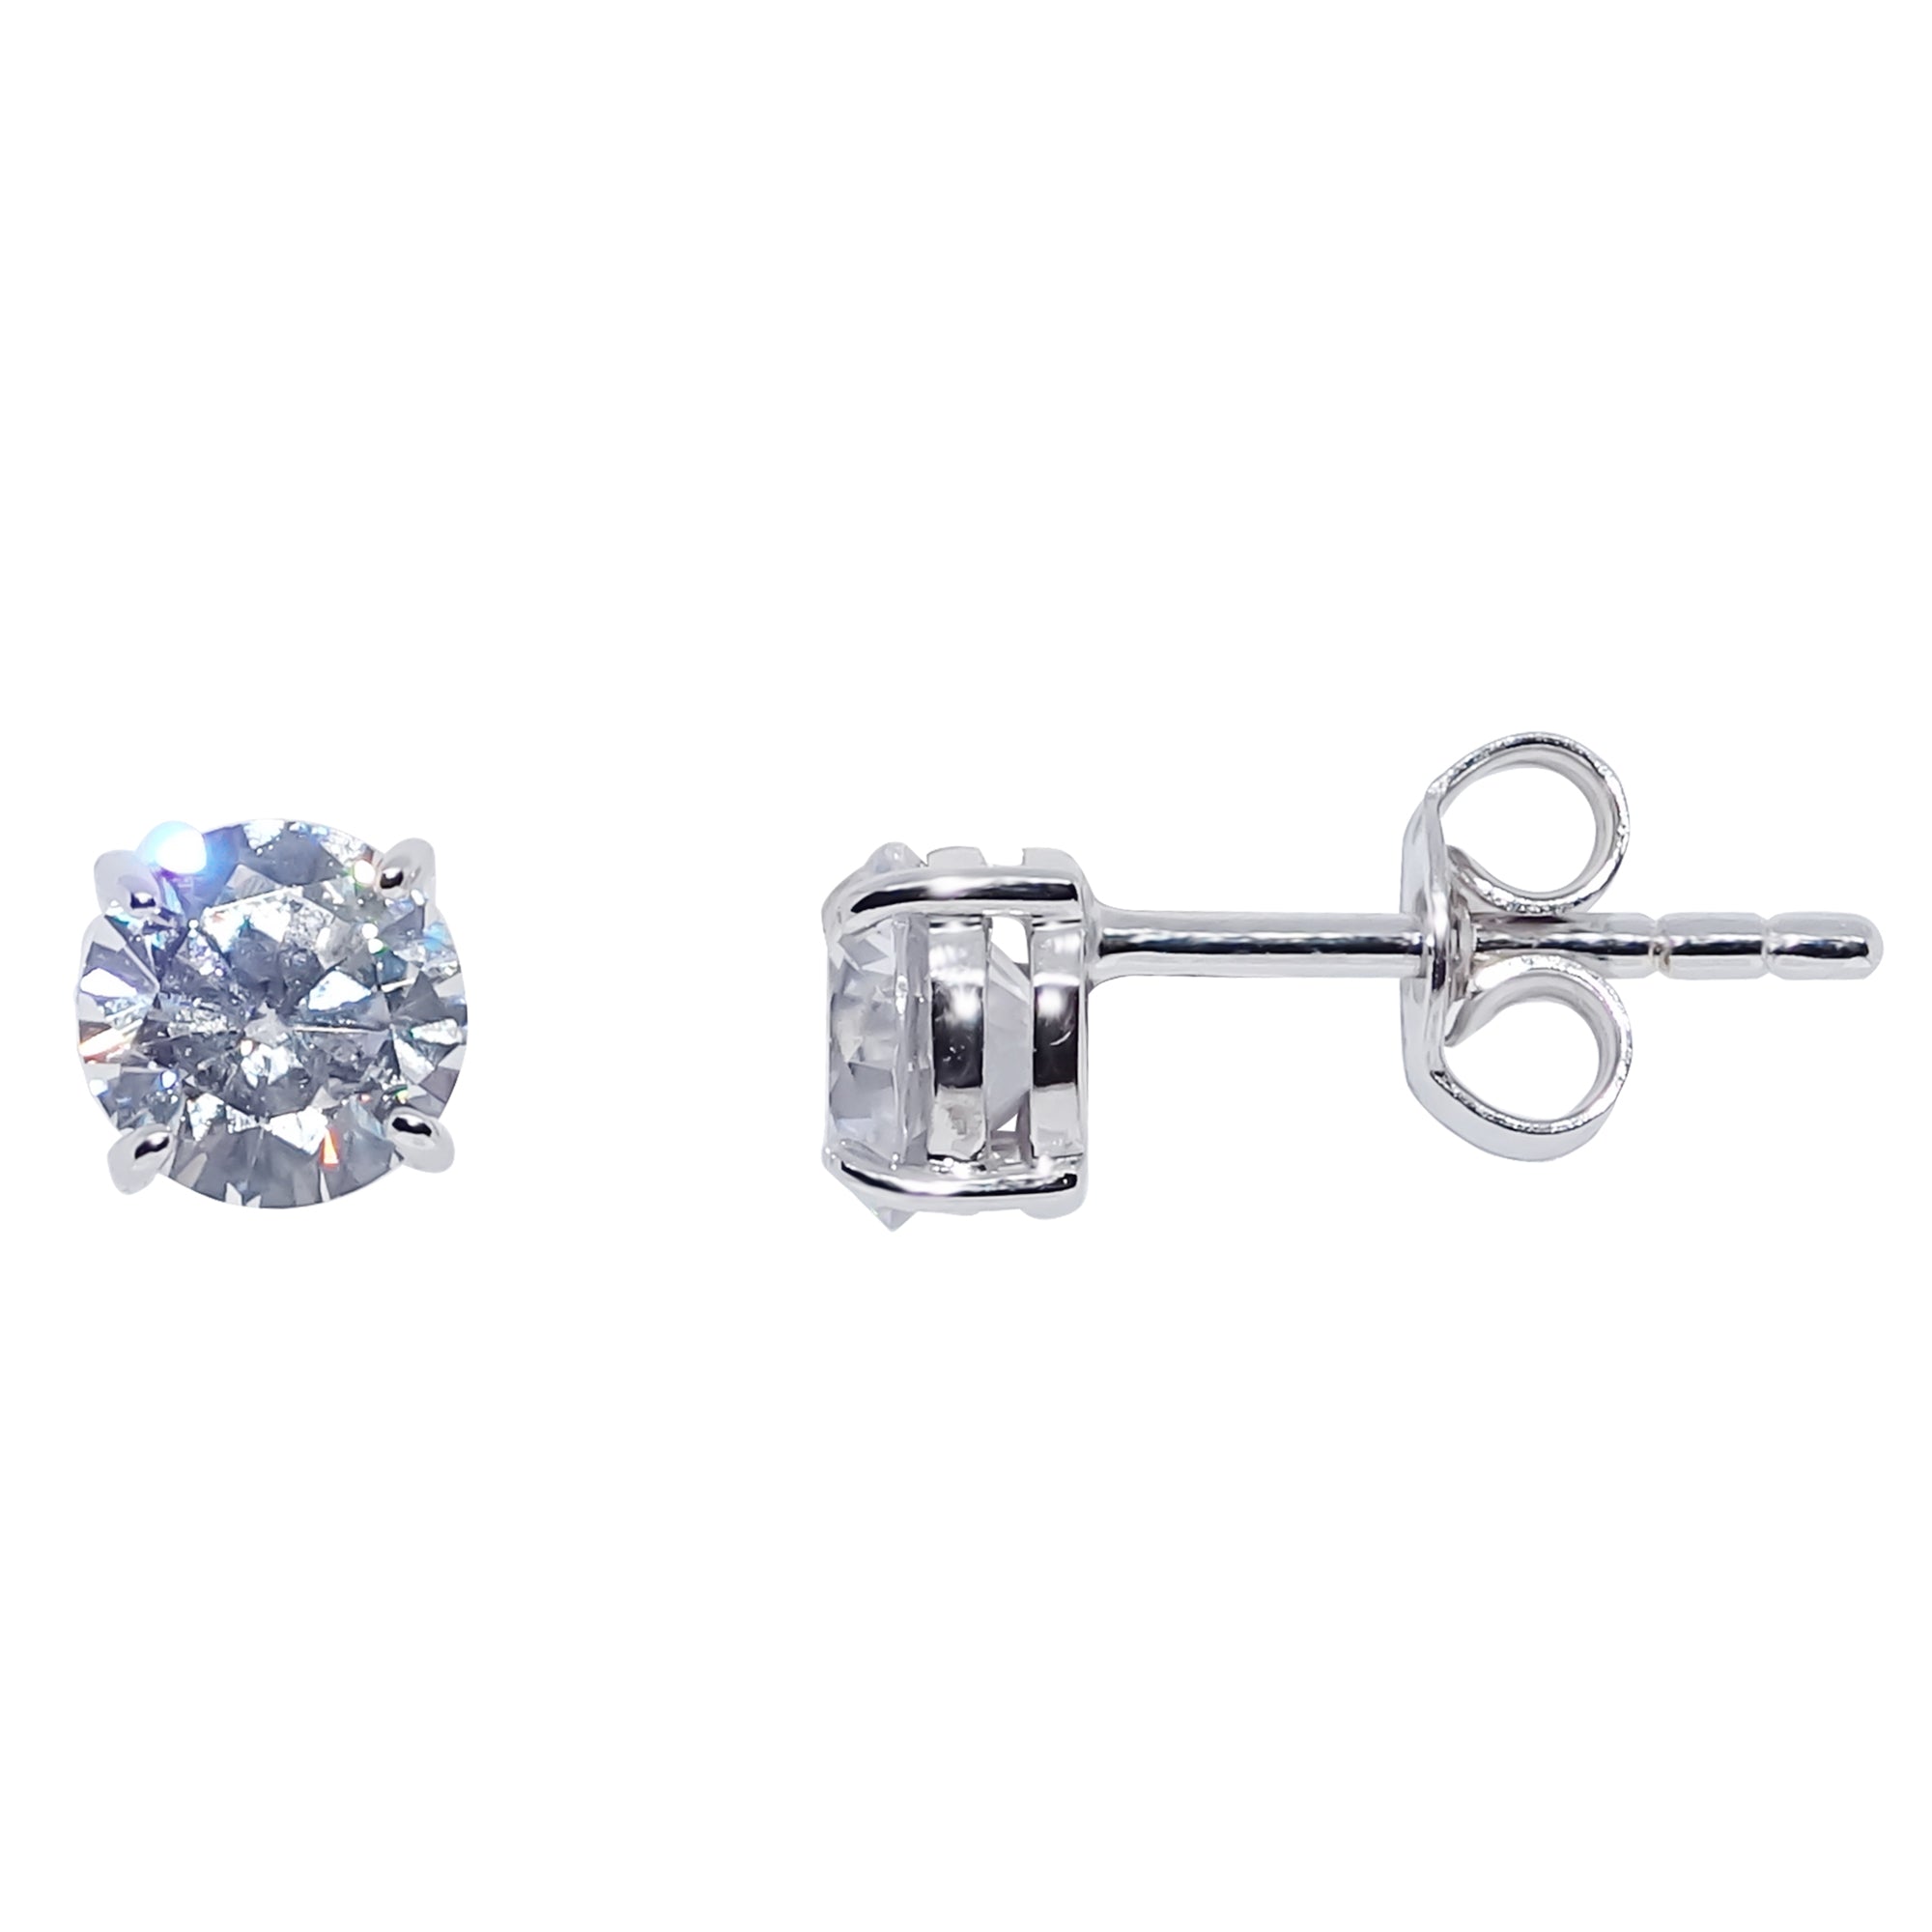 9ct white gold 5mm round cz stud earrings